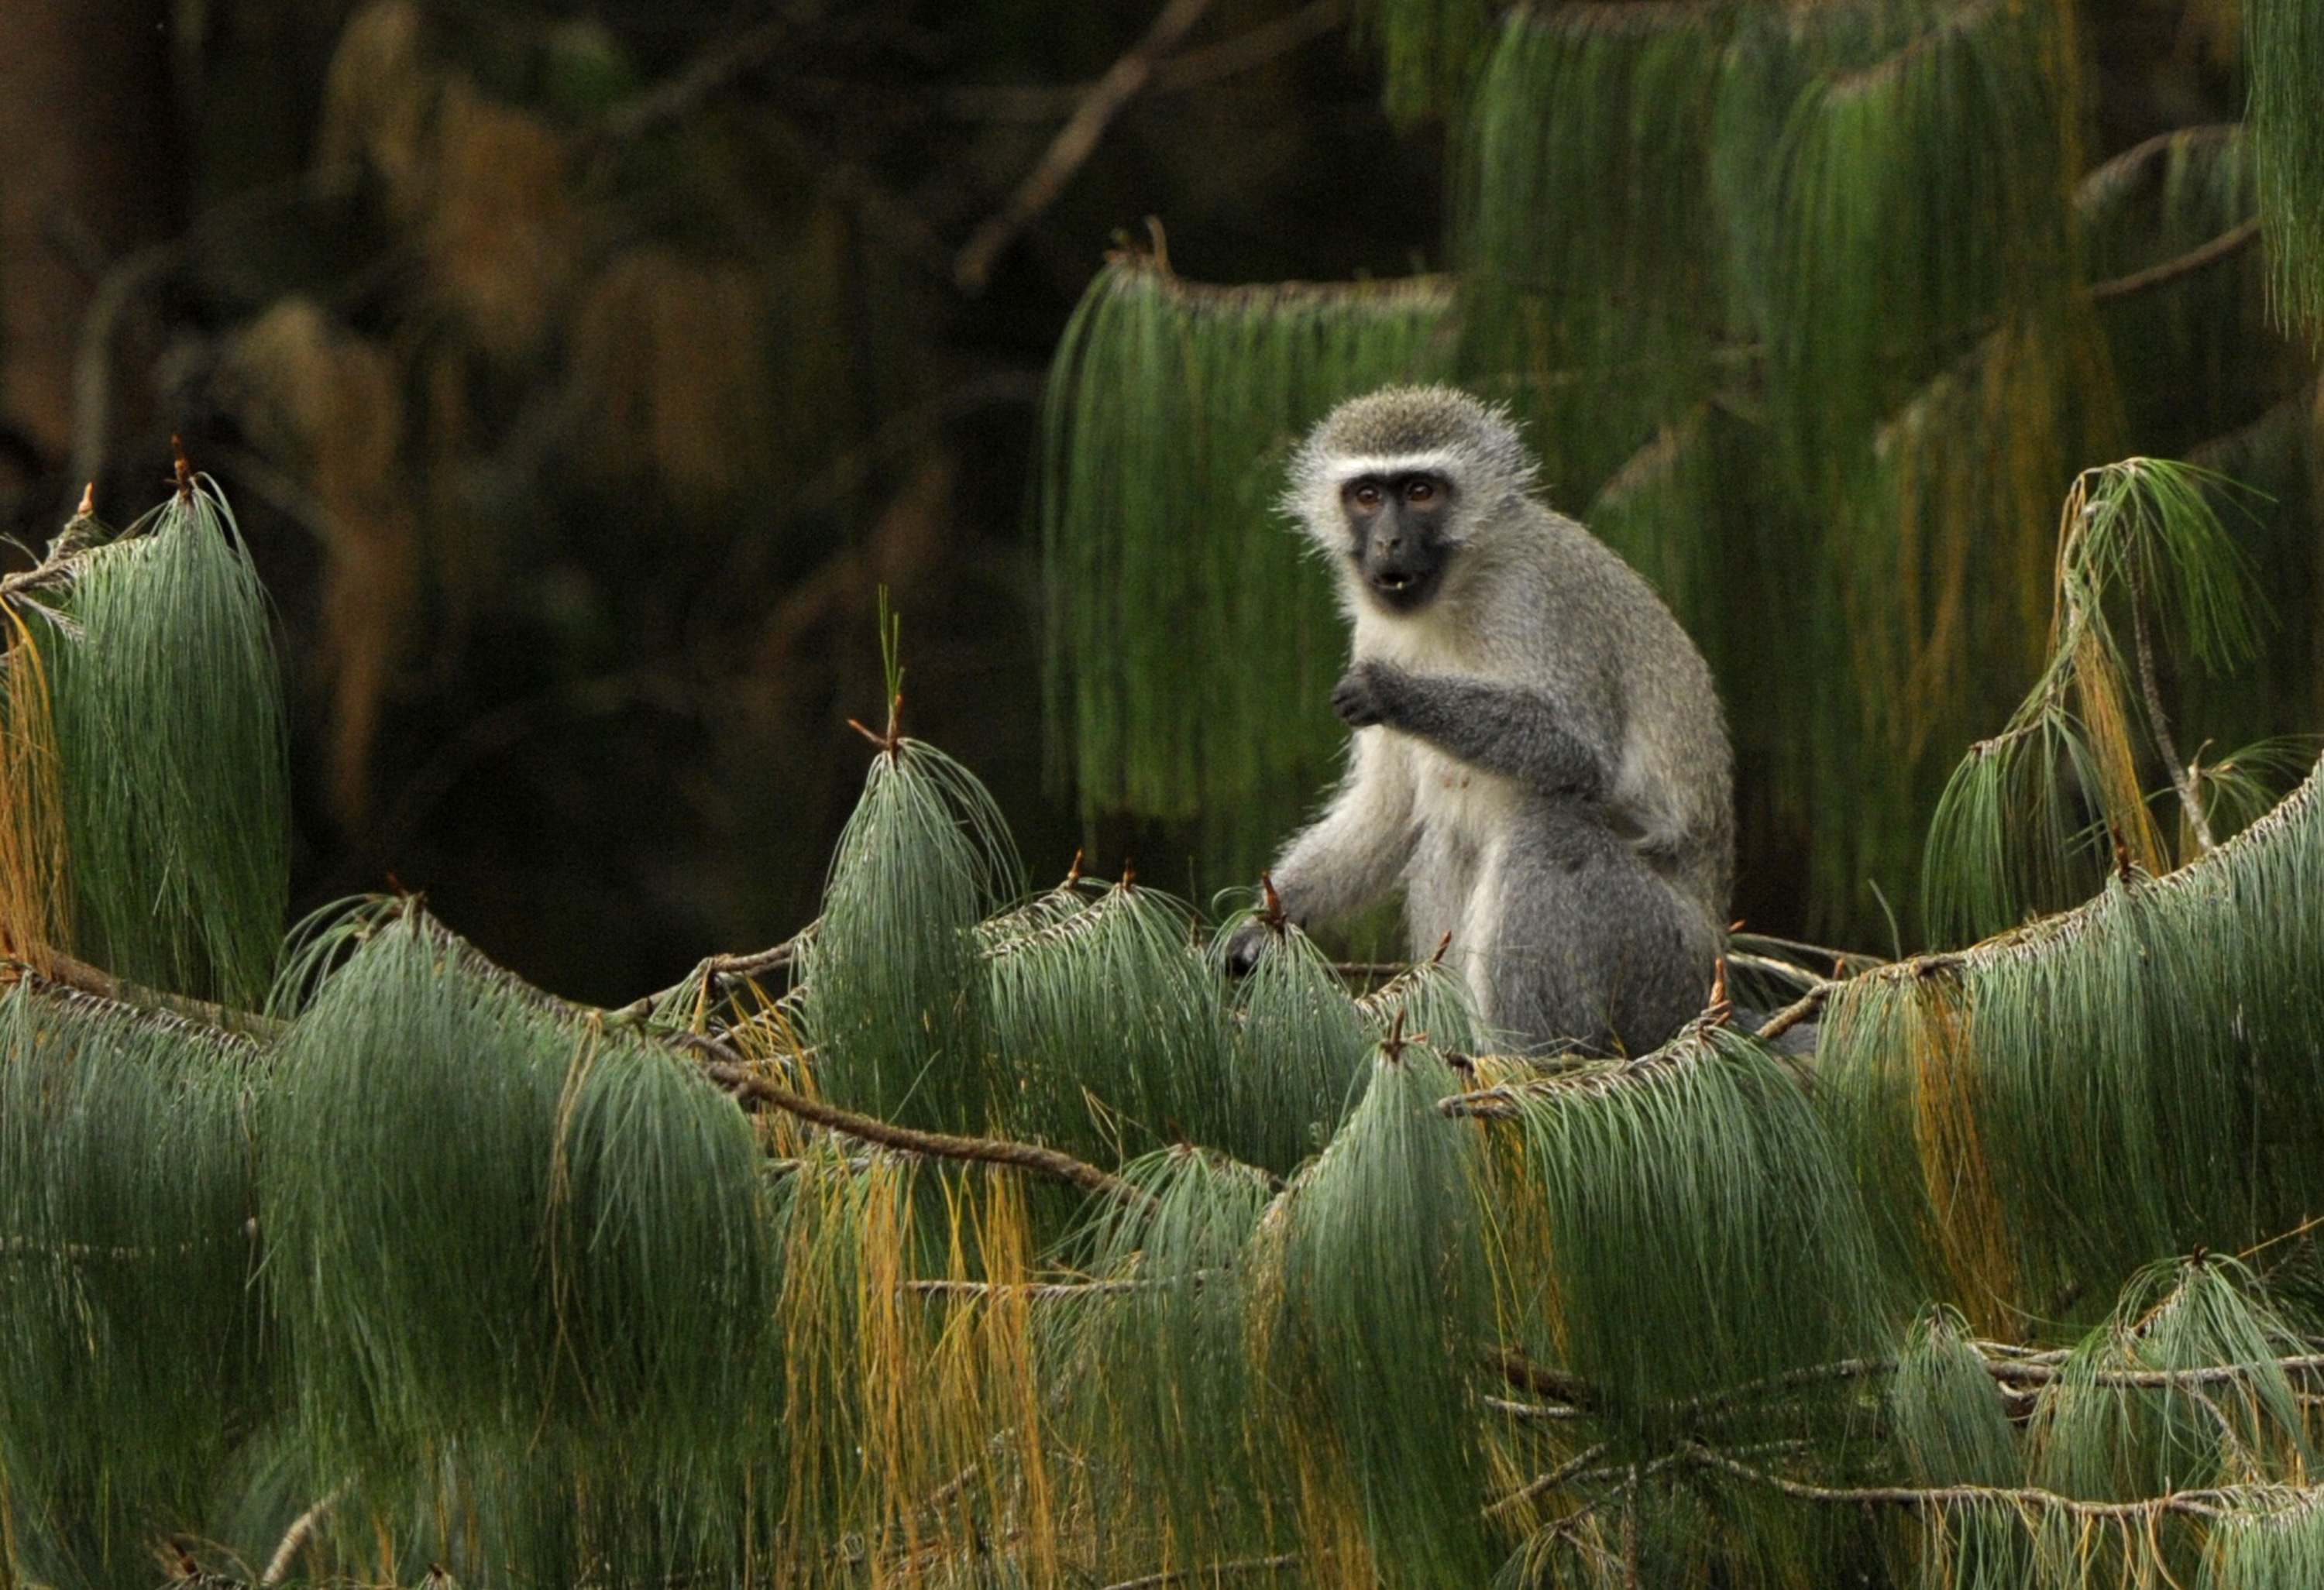 A female vervet monkey eats while seated on a pine branch in Balgowan on June 27, 2010 near Paraguay's squad base camp, during a closed training session day, ahead of the team's South Africa 2010 World Cup round of 16 match against Japan in Pretoria on June 29. AFP PHOTO / JUAN MABROMATA / AFP PHOTO / JUAN MABROMATA